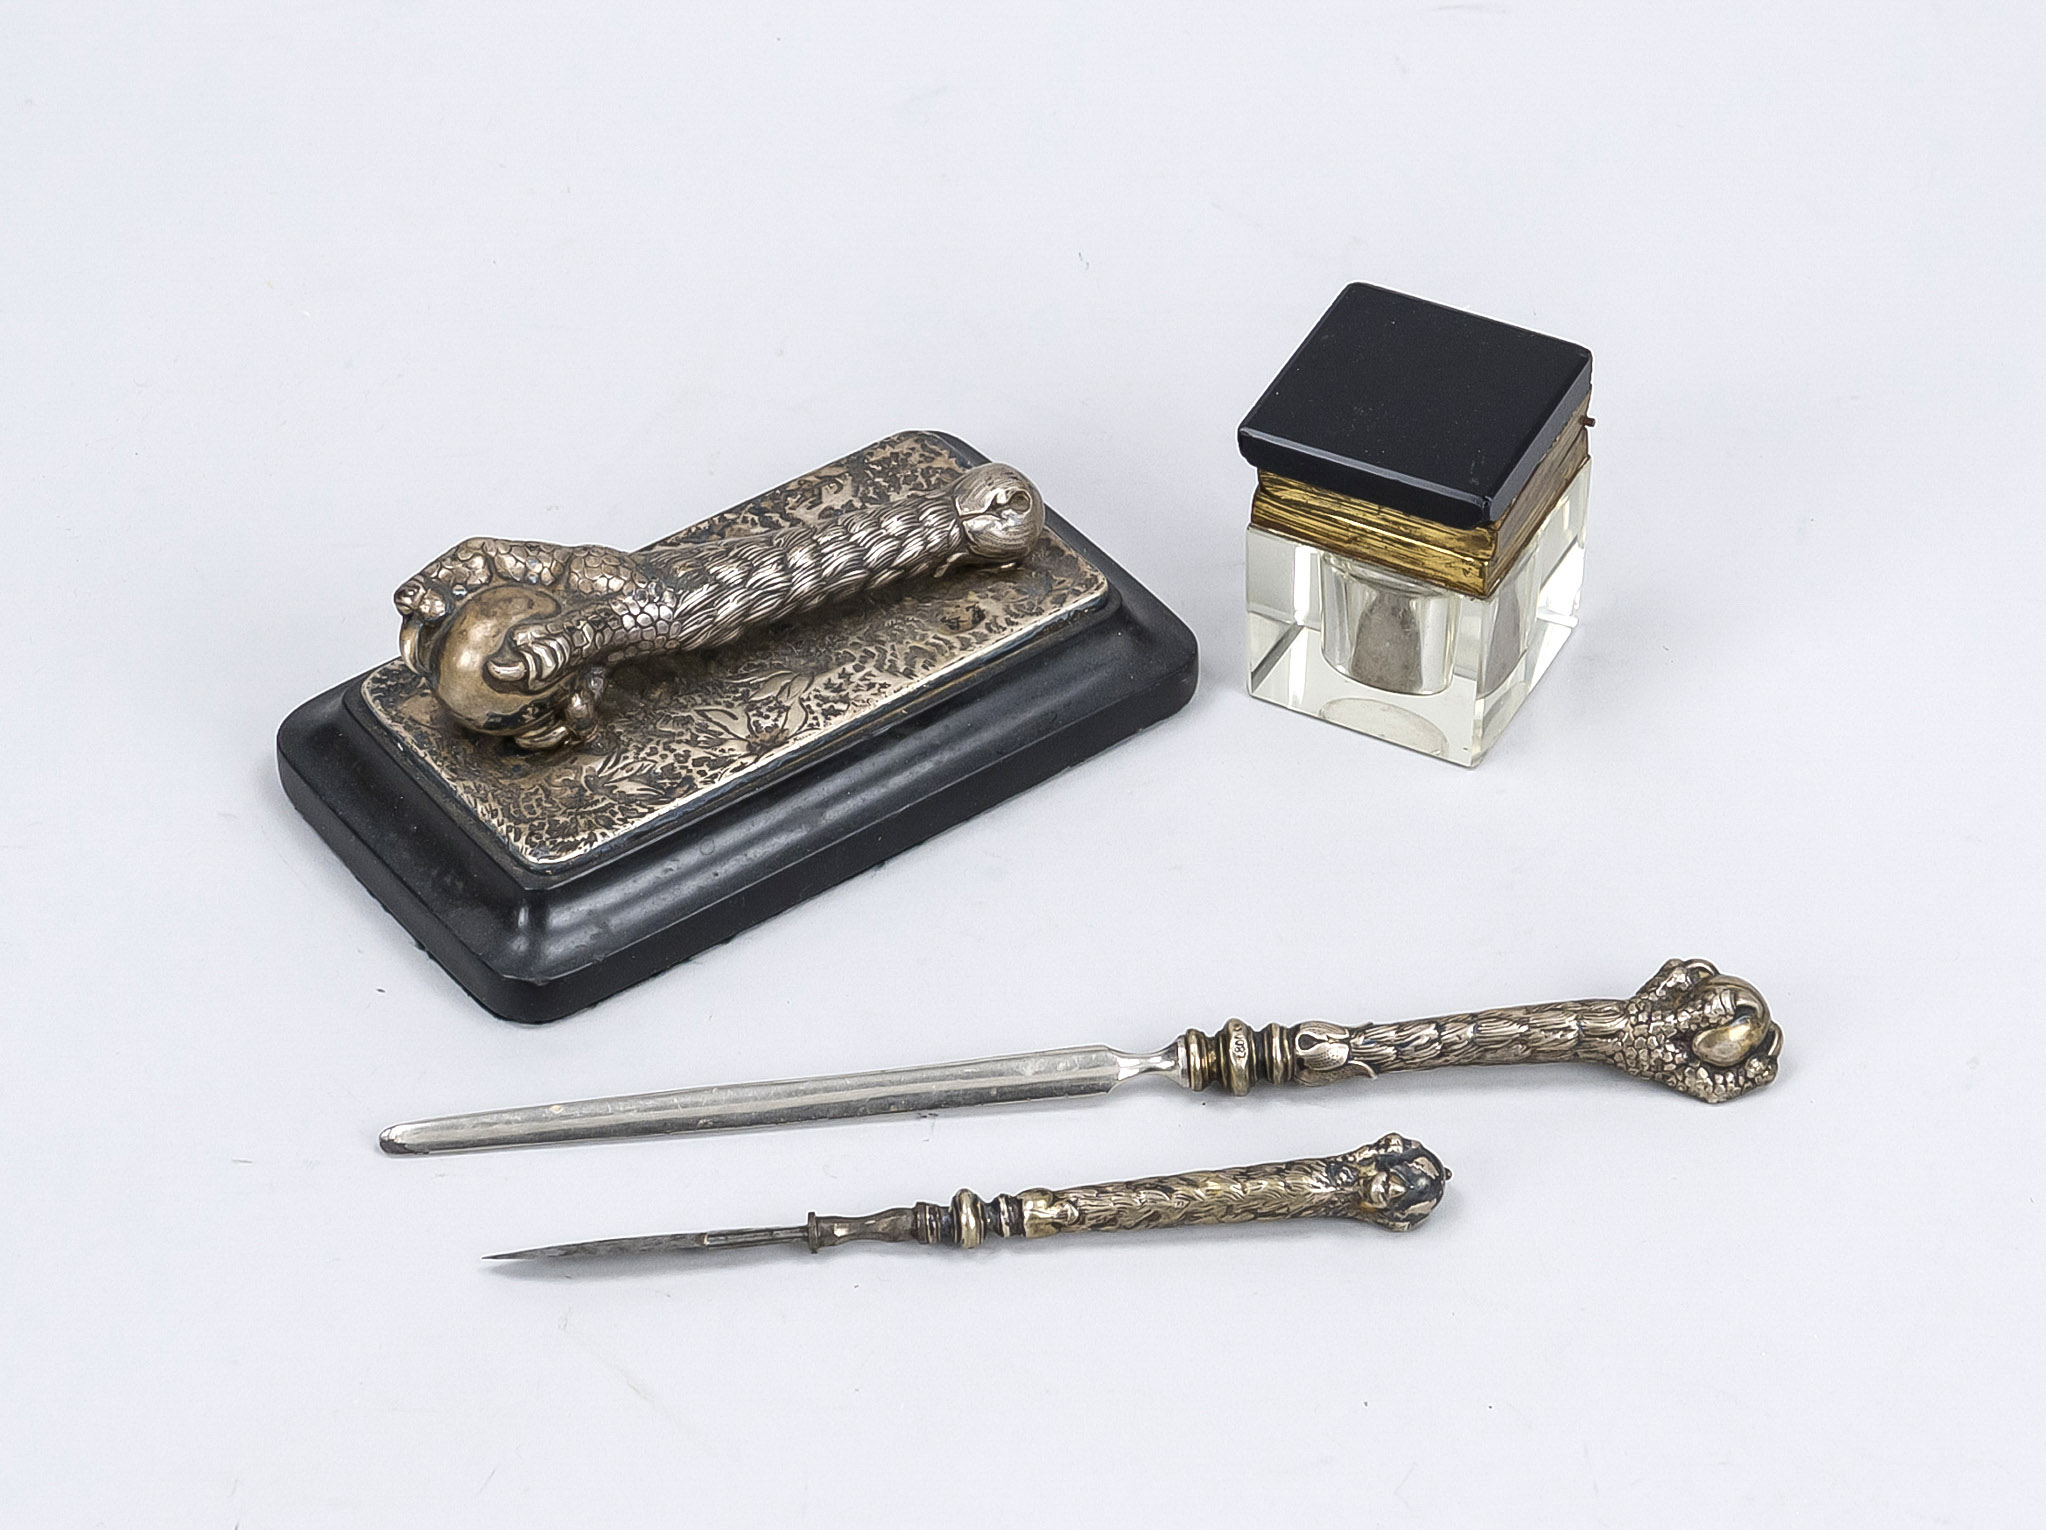 Desk utensils, late 19th century, silver paperweight (stamped 800) on black polished stone, a bird's